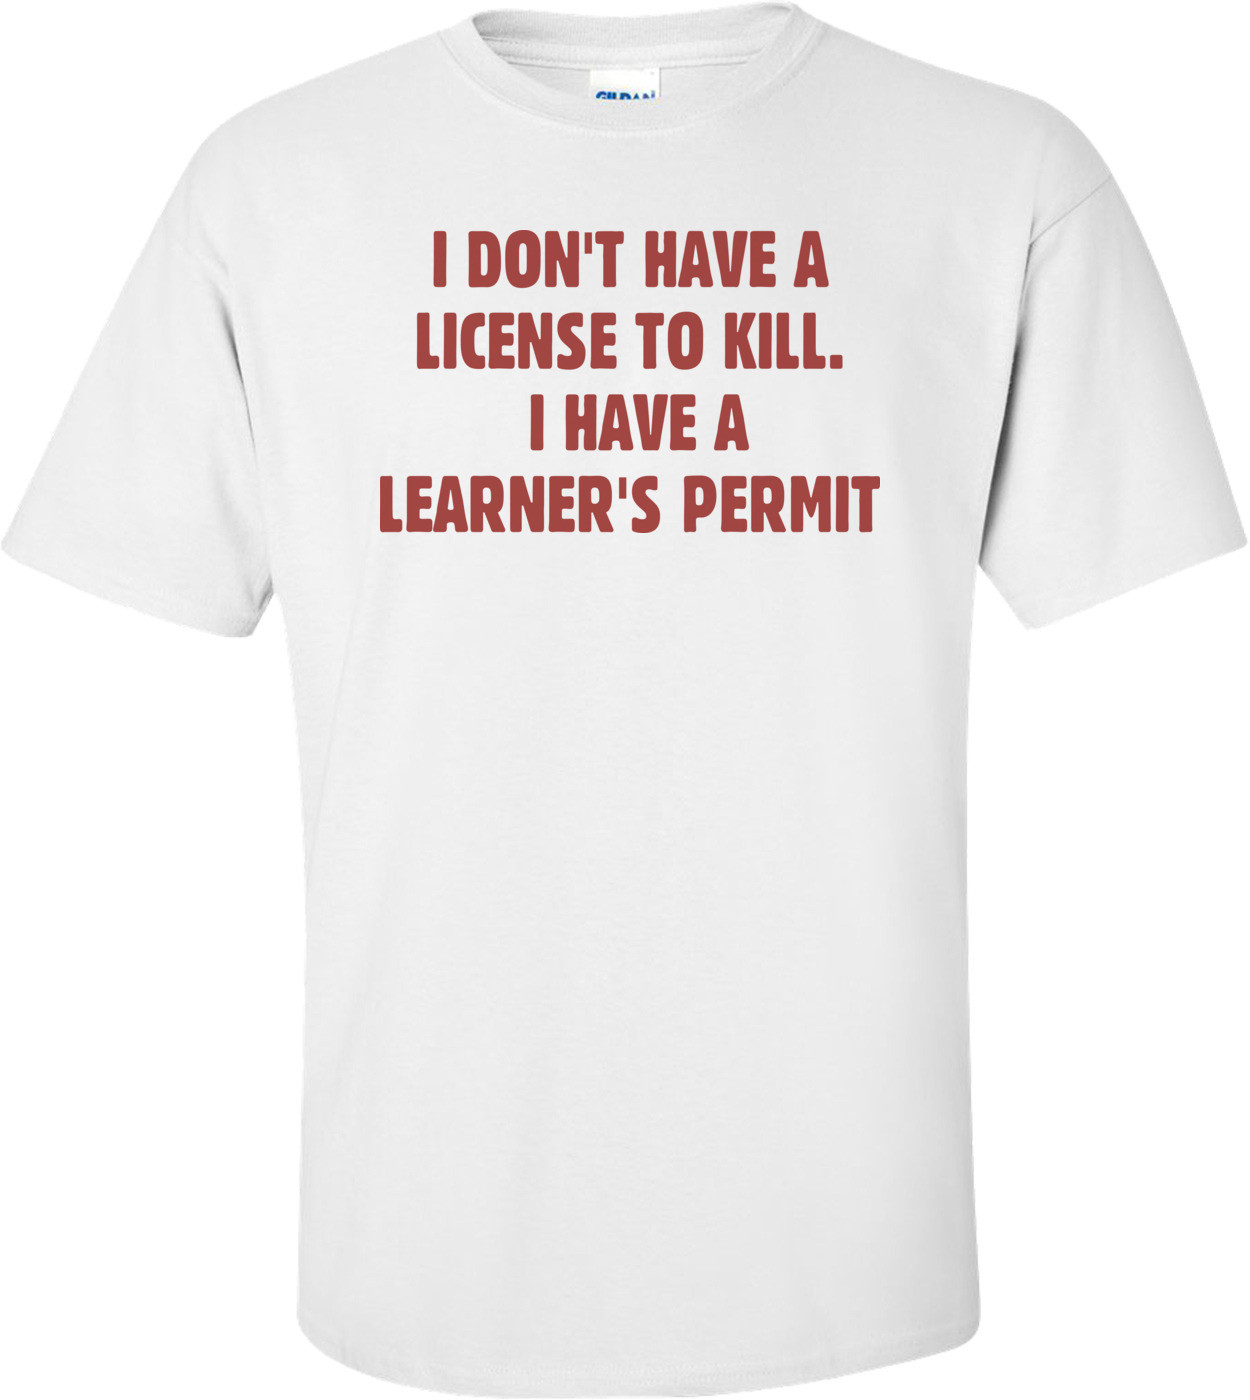 I Don't Have A License To Kill. I Have A Learner's Permit T-shirt